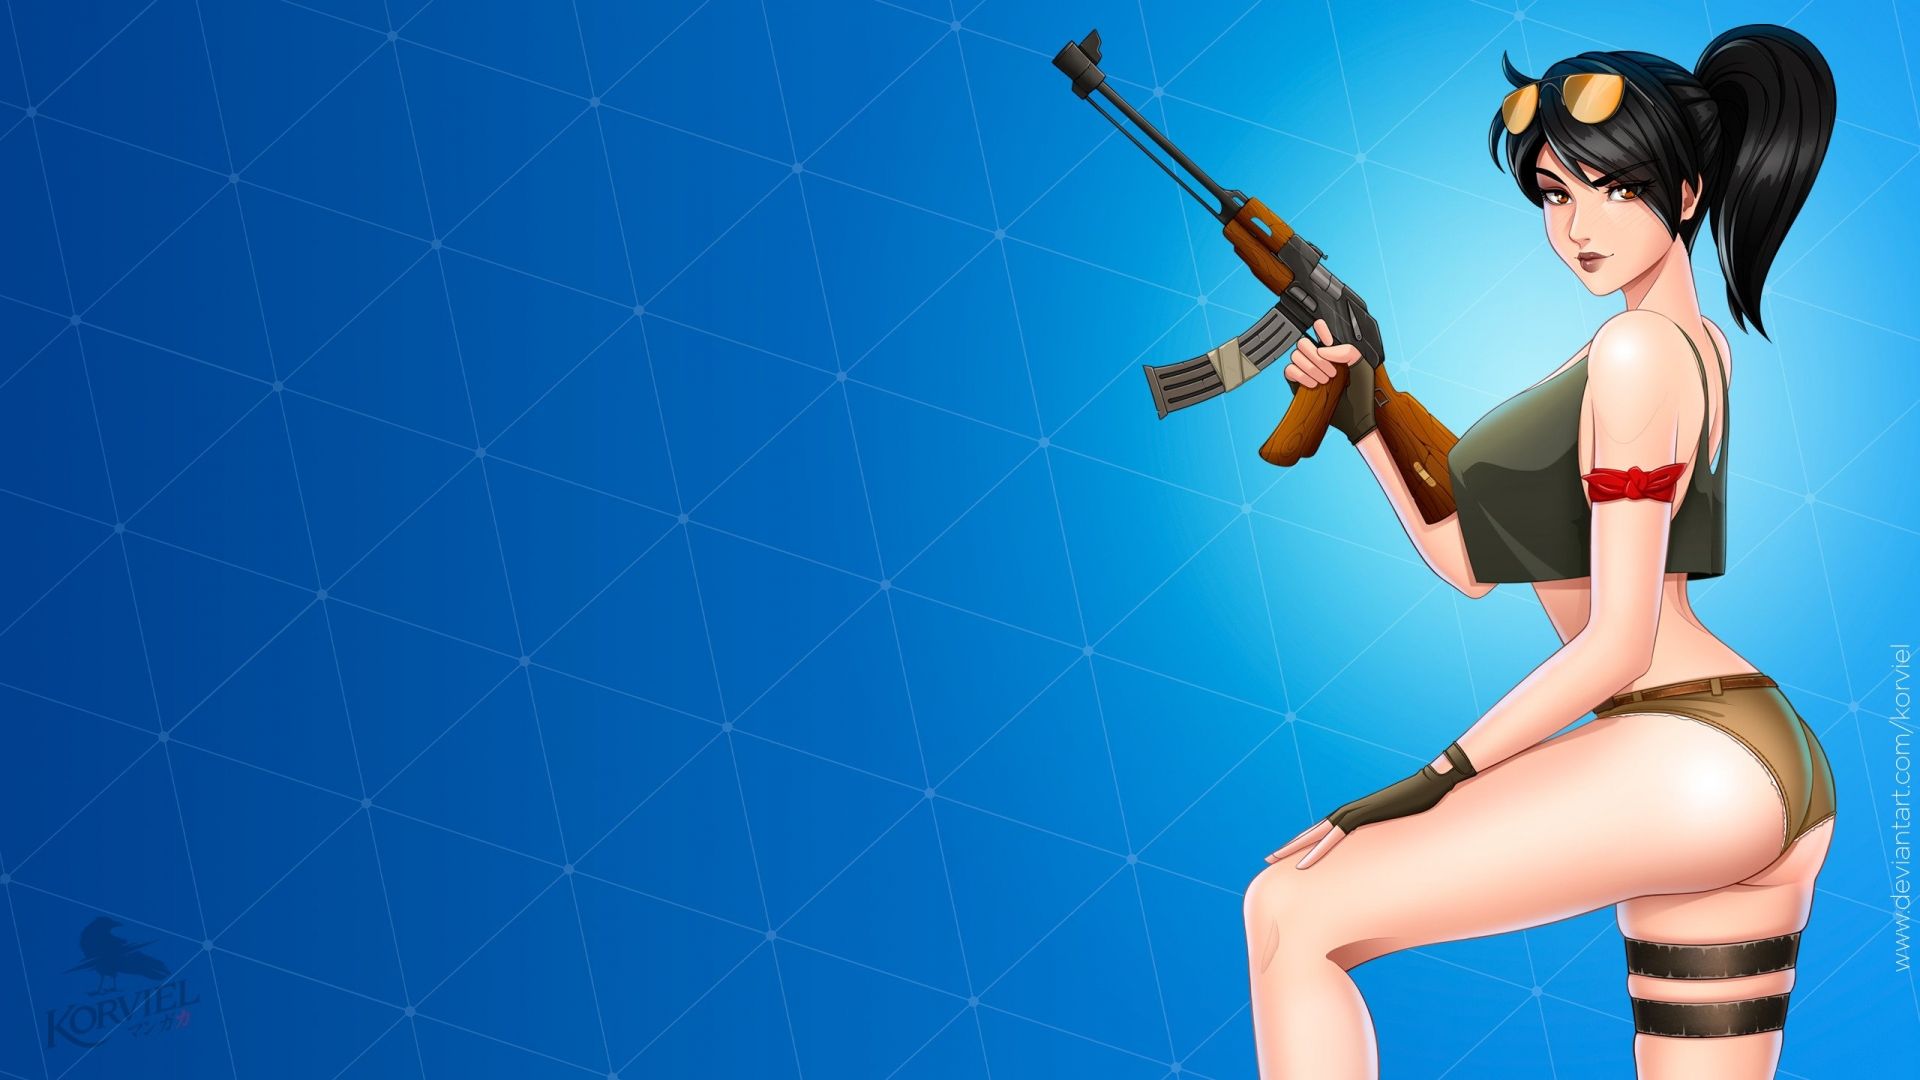 Free download Cute and Sexy Fortnite Backgrounds by Korviel 4417.